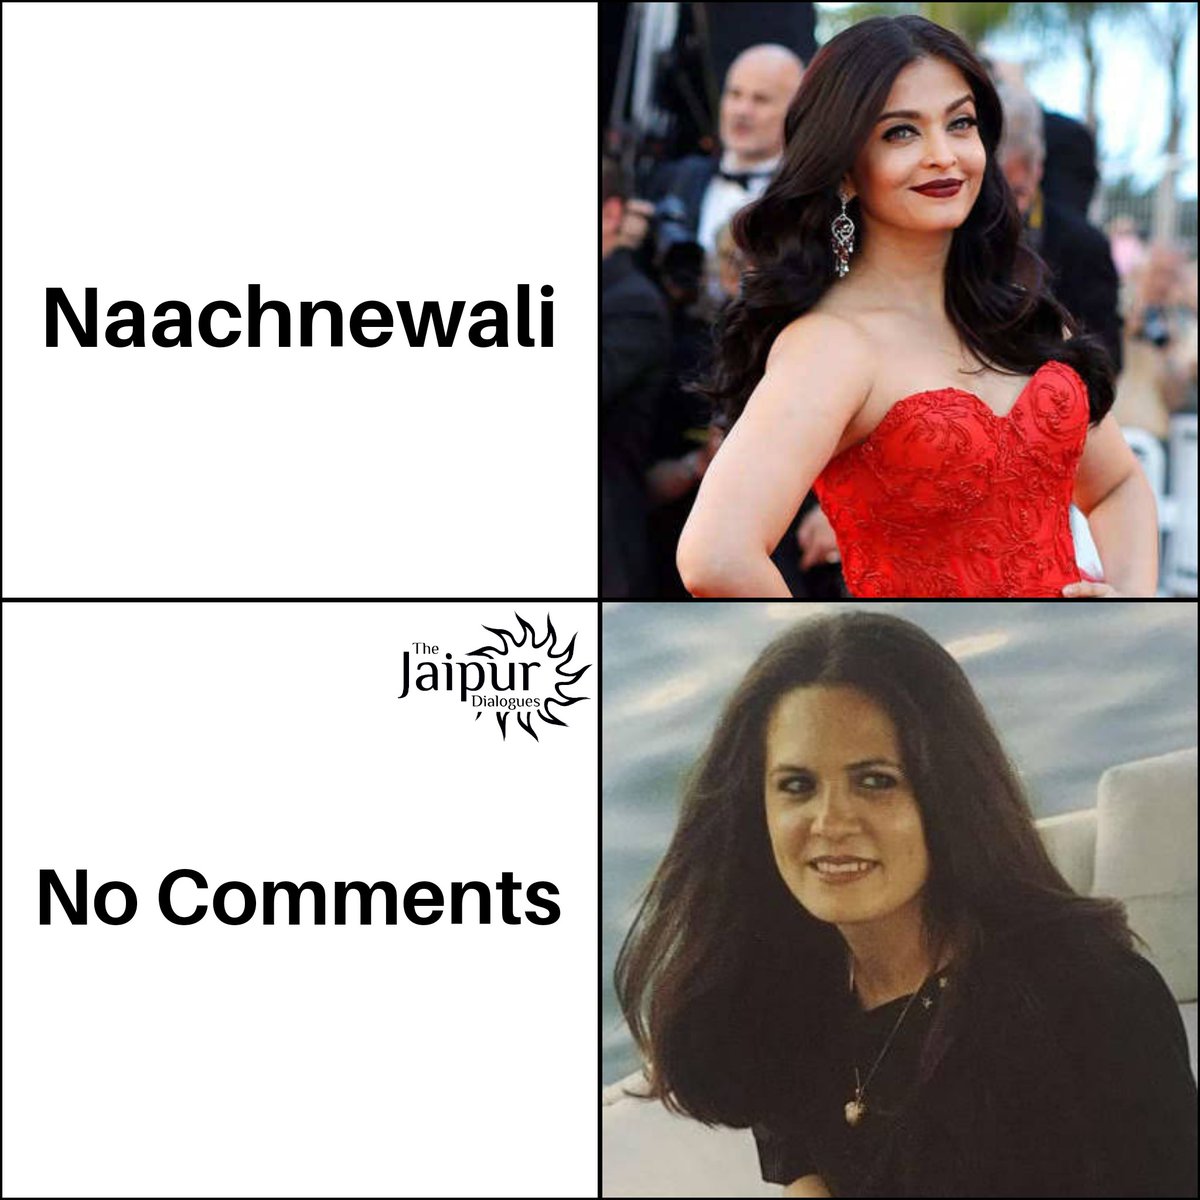 Aishwarya Rai is called Nachne wali by Rahul Gandhi & No Feminist is speaking up.

What if BJP Leader would've called some lady by that name? Well we'll leave it to that.